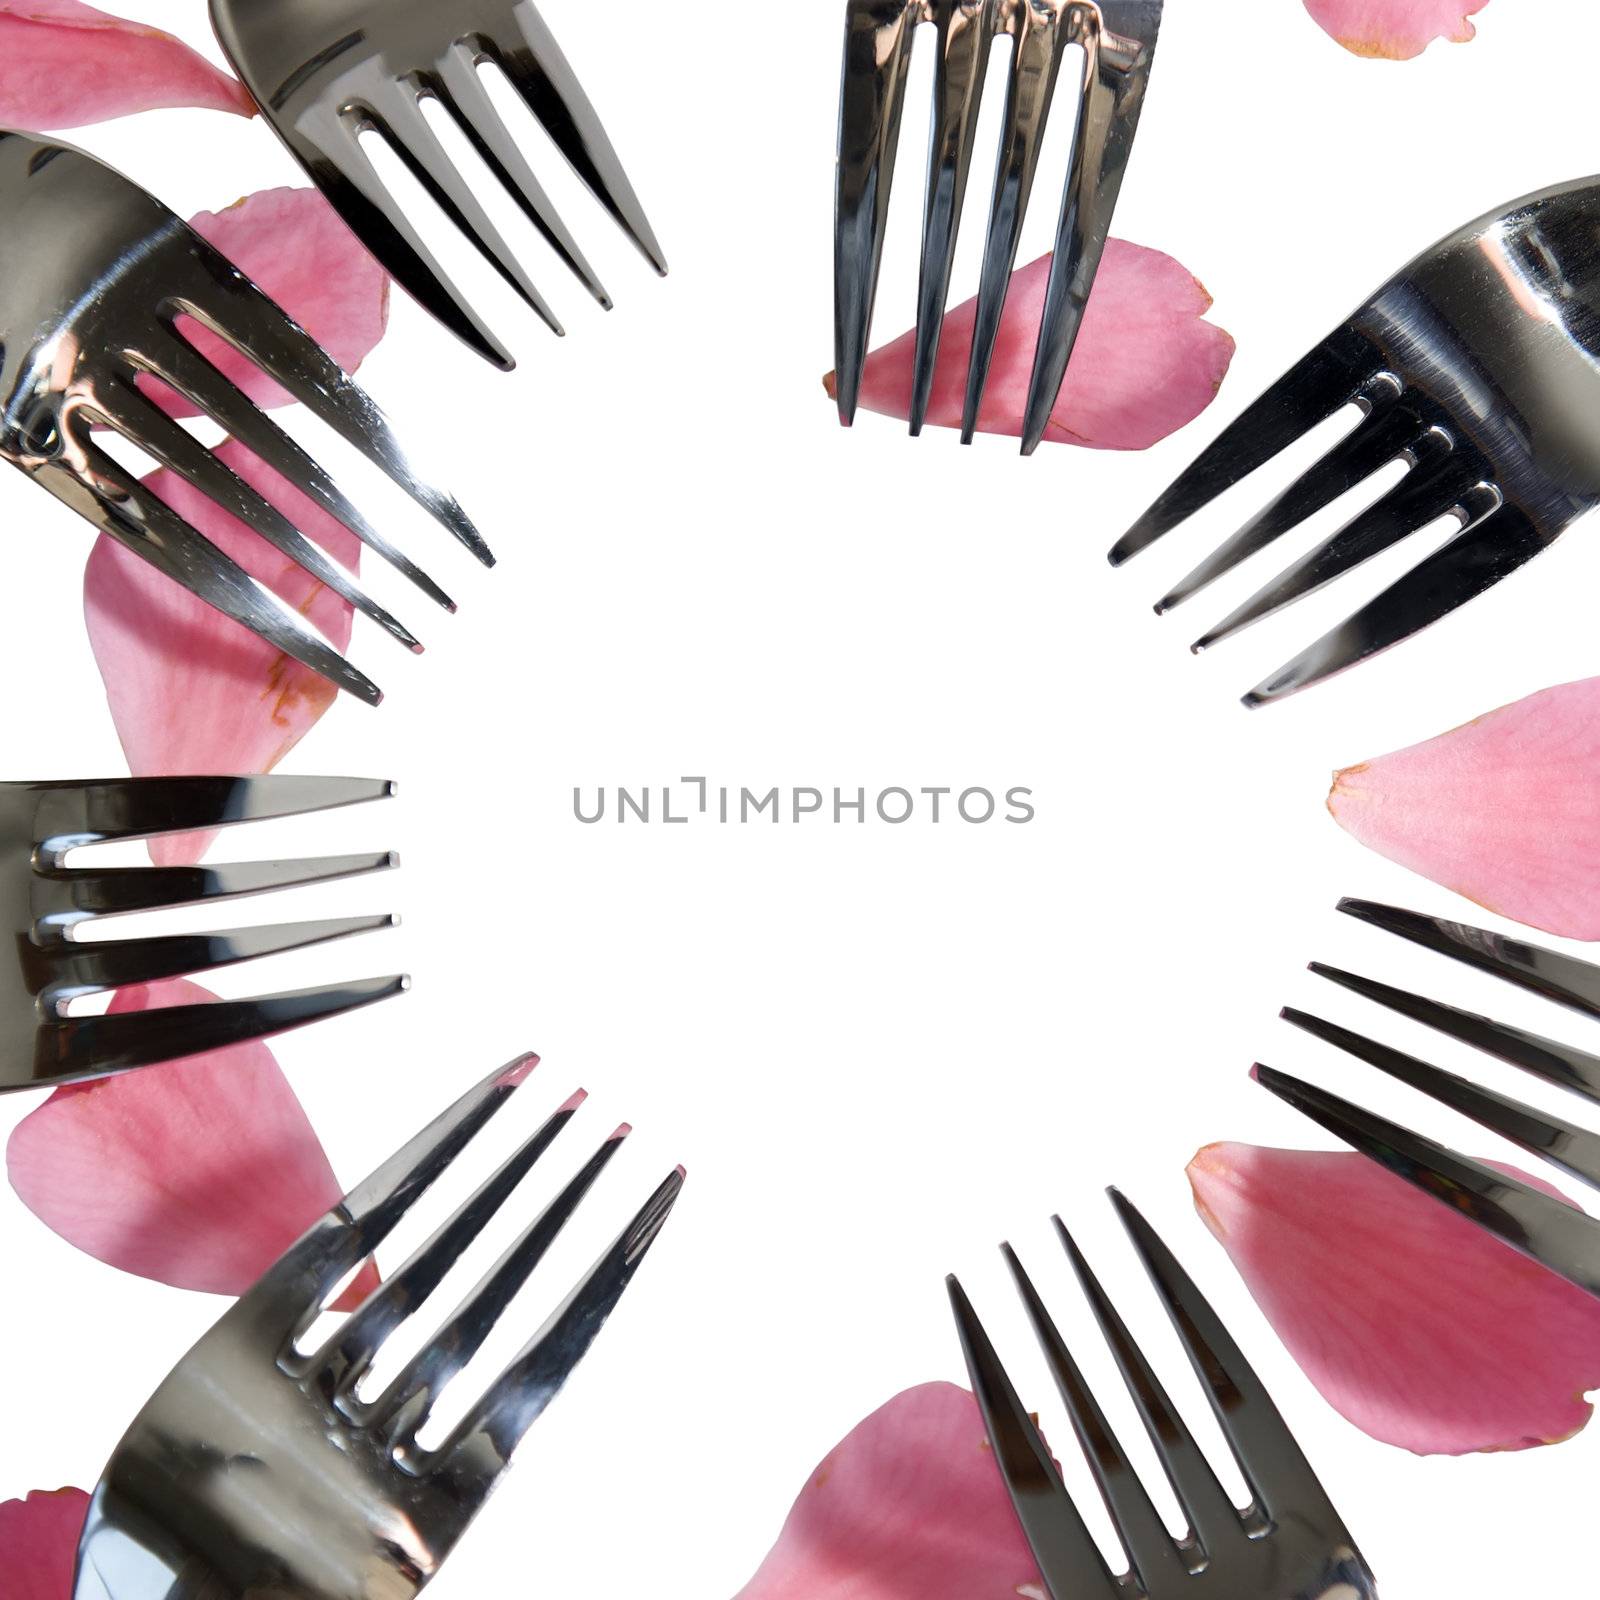 forks in a circle with rose petals by morrbyte